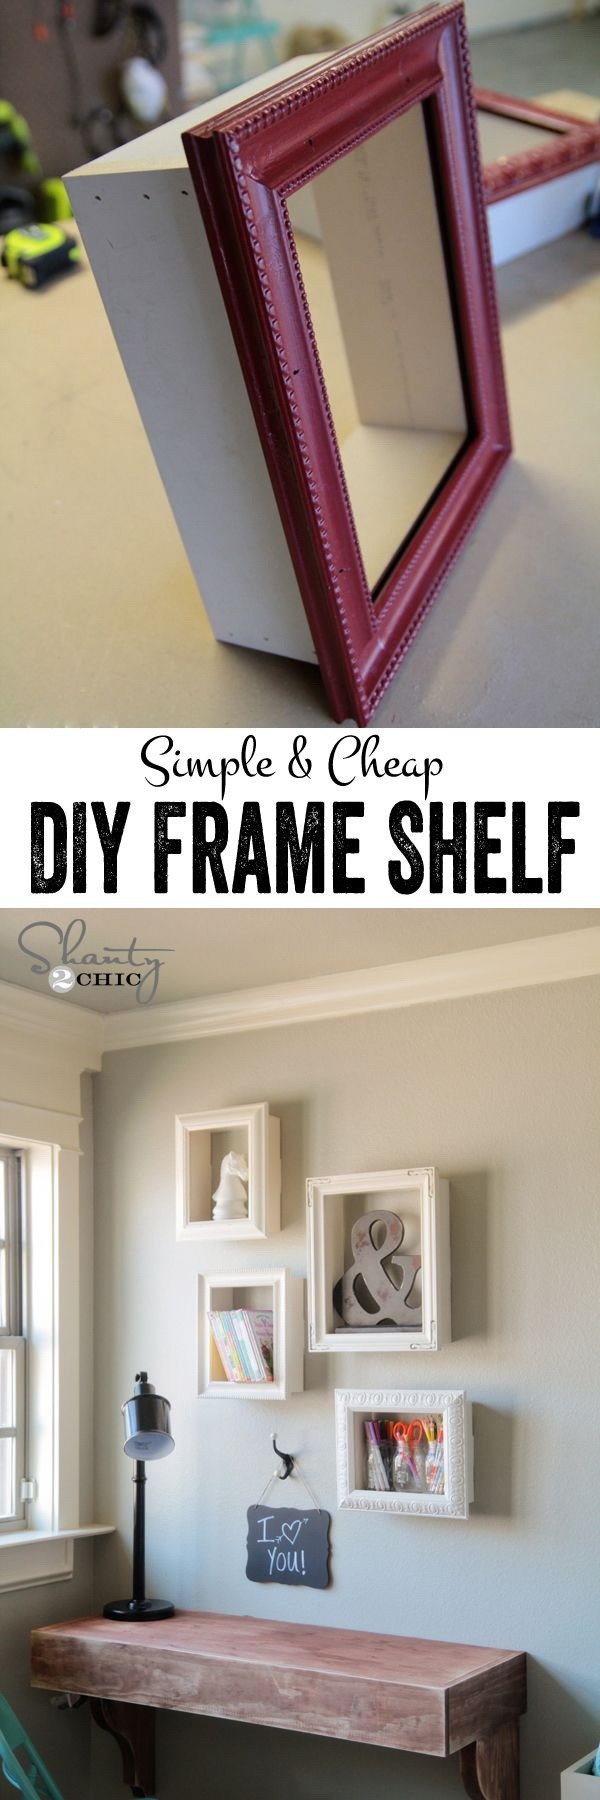 DIY Frames for Wall Decor:  Turn the simple frames from the local thrift store into these expensive frames by attaching wood to all sides and hang on wall. Low budget with high impact DIY project for your home decor! 